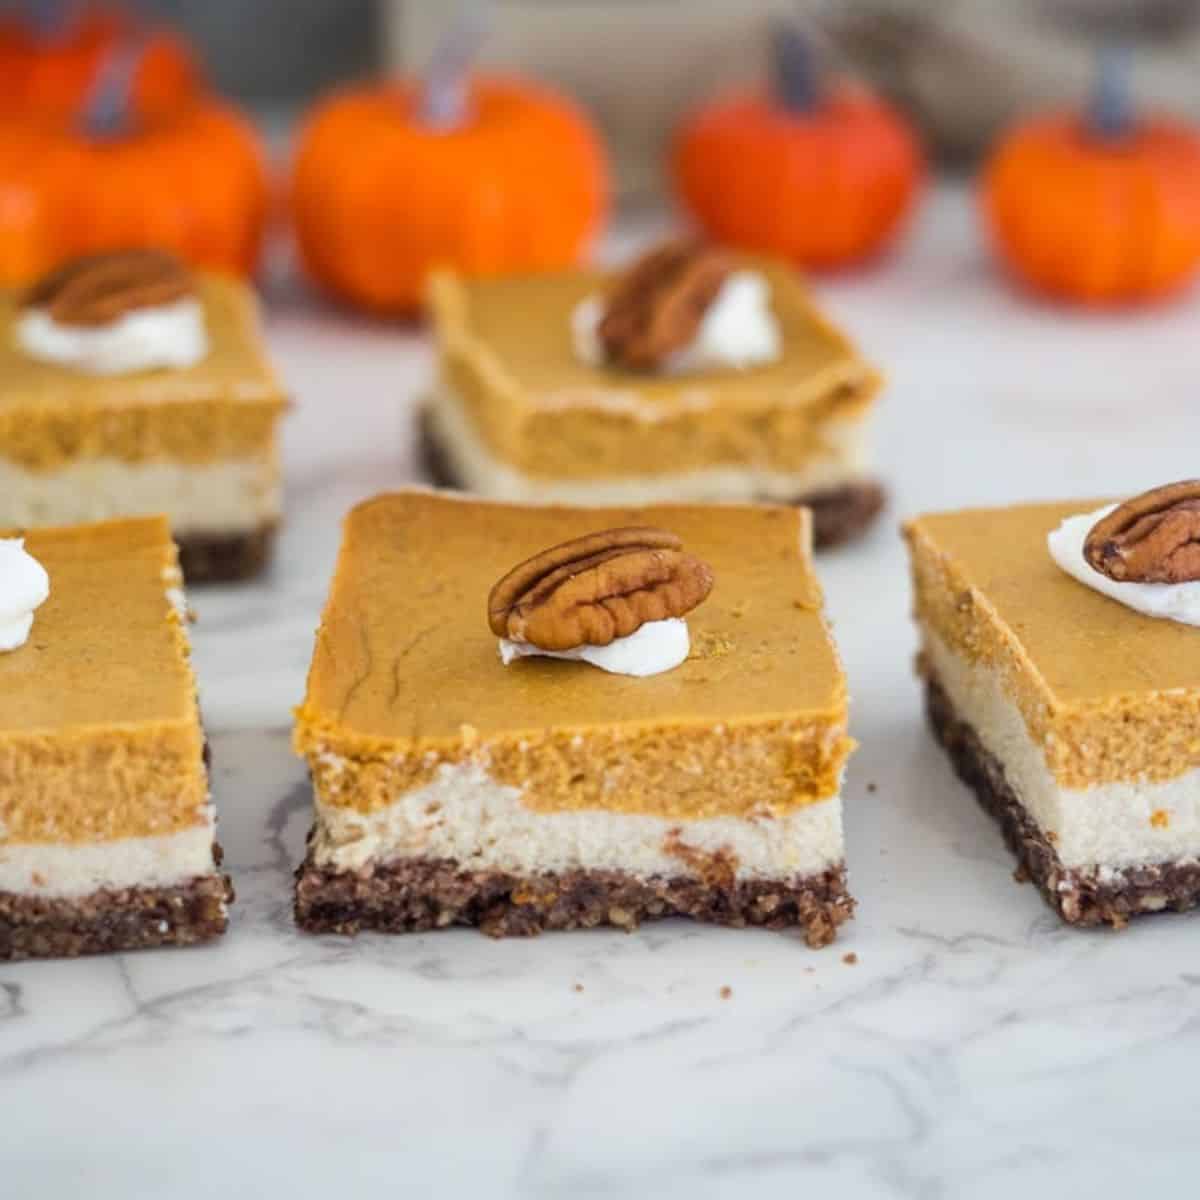 Pumpkin cheesecake bars with pecans on top.